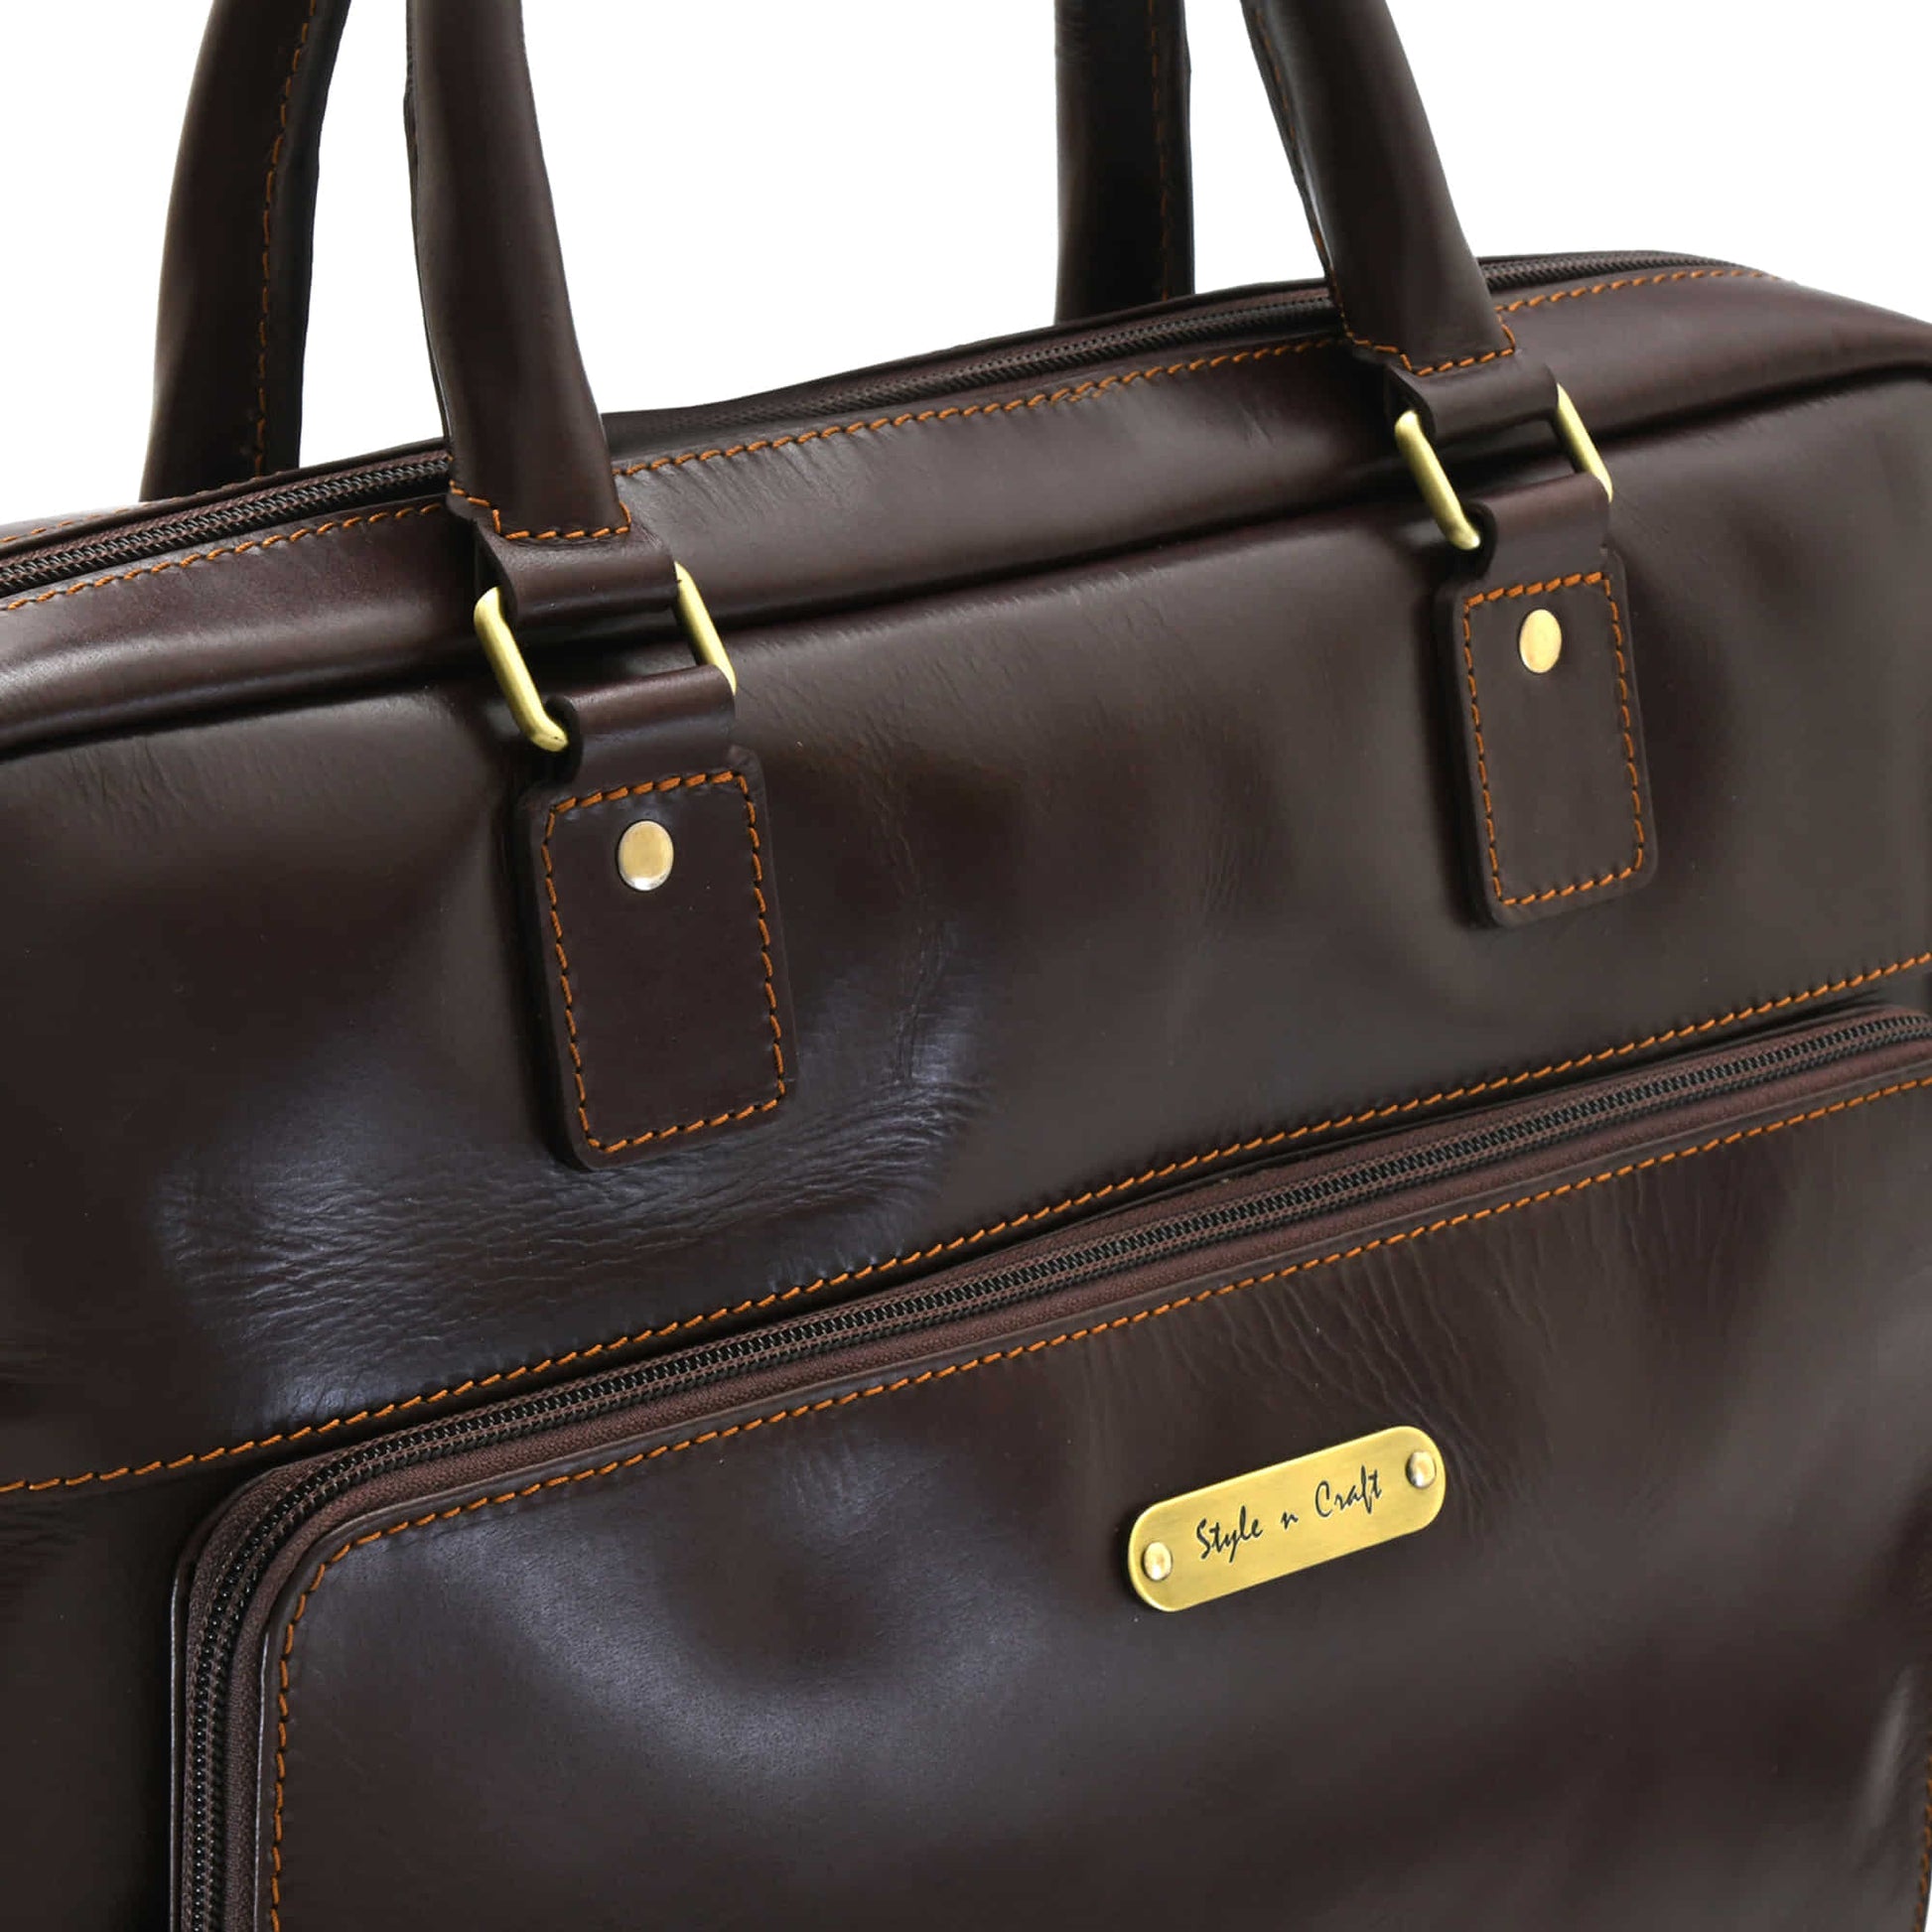 Style n Craft 392009 Men's Portfolio Briefcase Bag in Full Grain Dark Brown Leather - Front Angled Profile View showing the Logo on the External Zippered Pocket